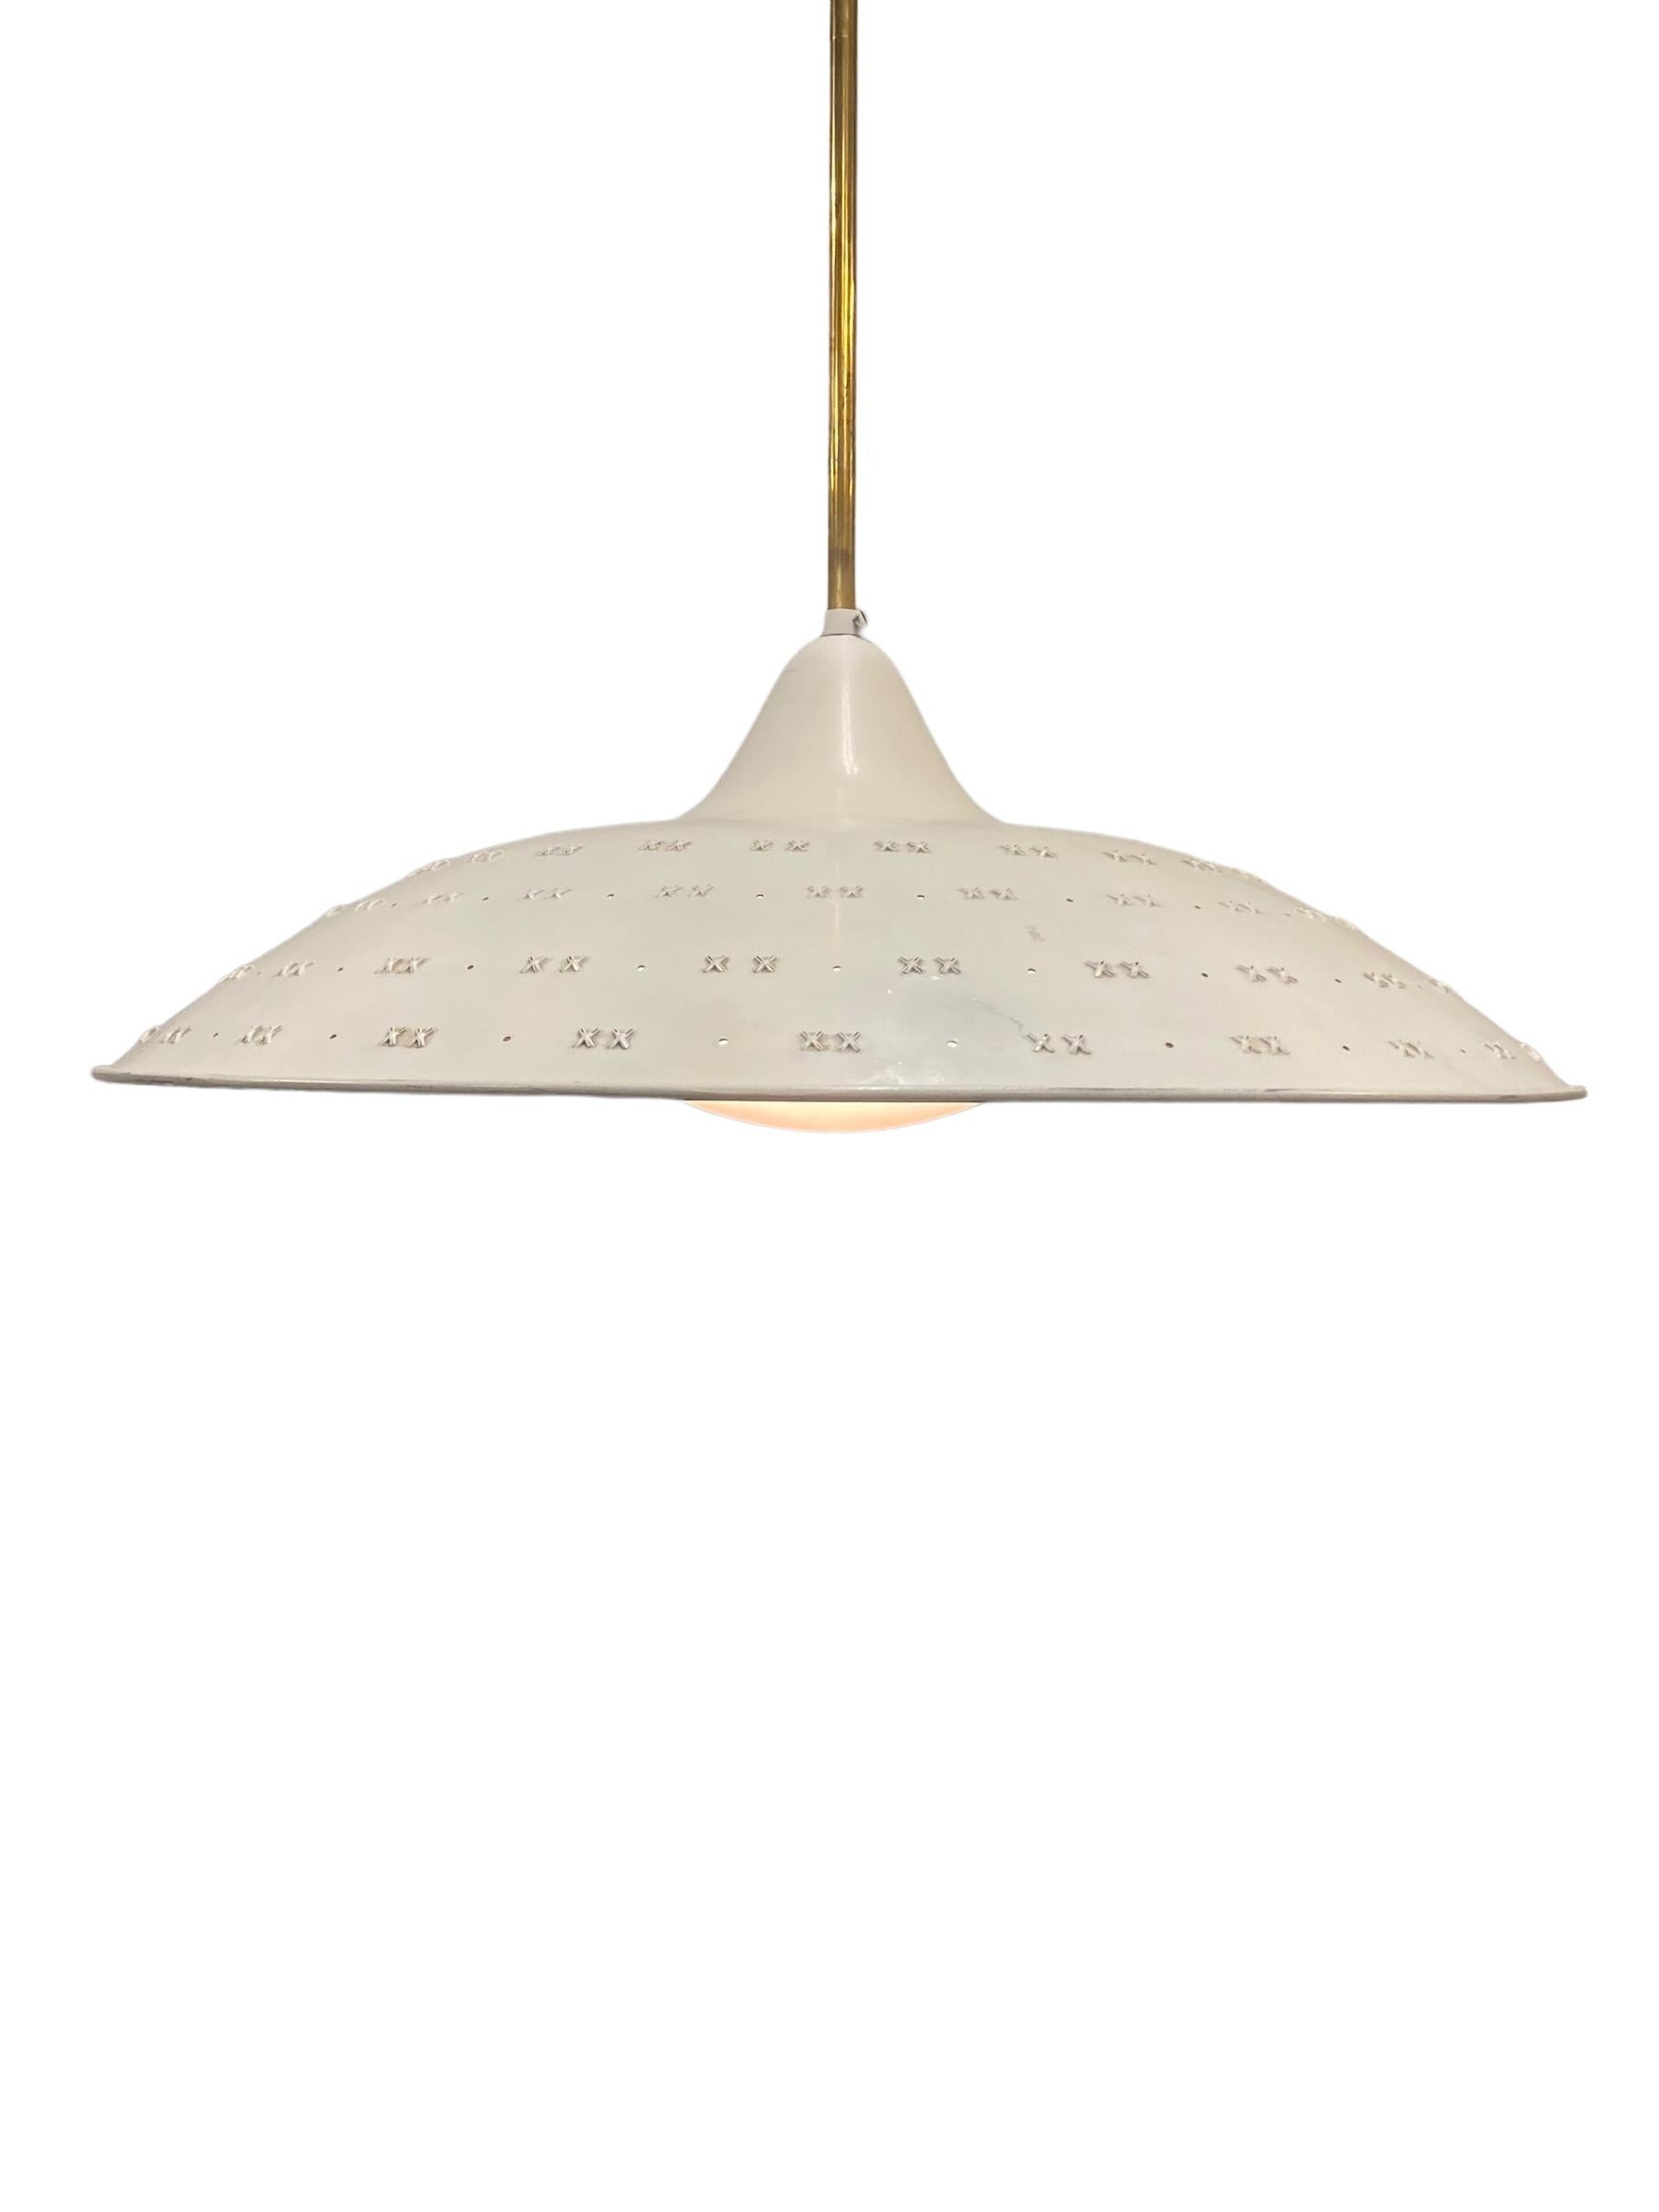 A Rare Lisa-Johansson Pape Ceiling Lamp FN 03-433, Orno 1950s For Sale 1